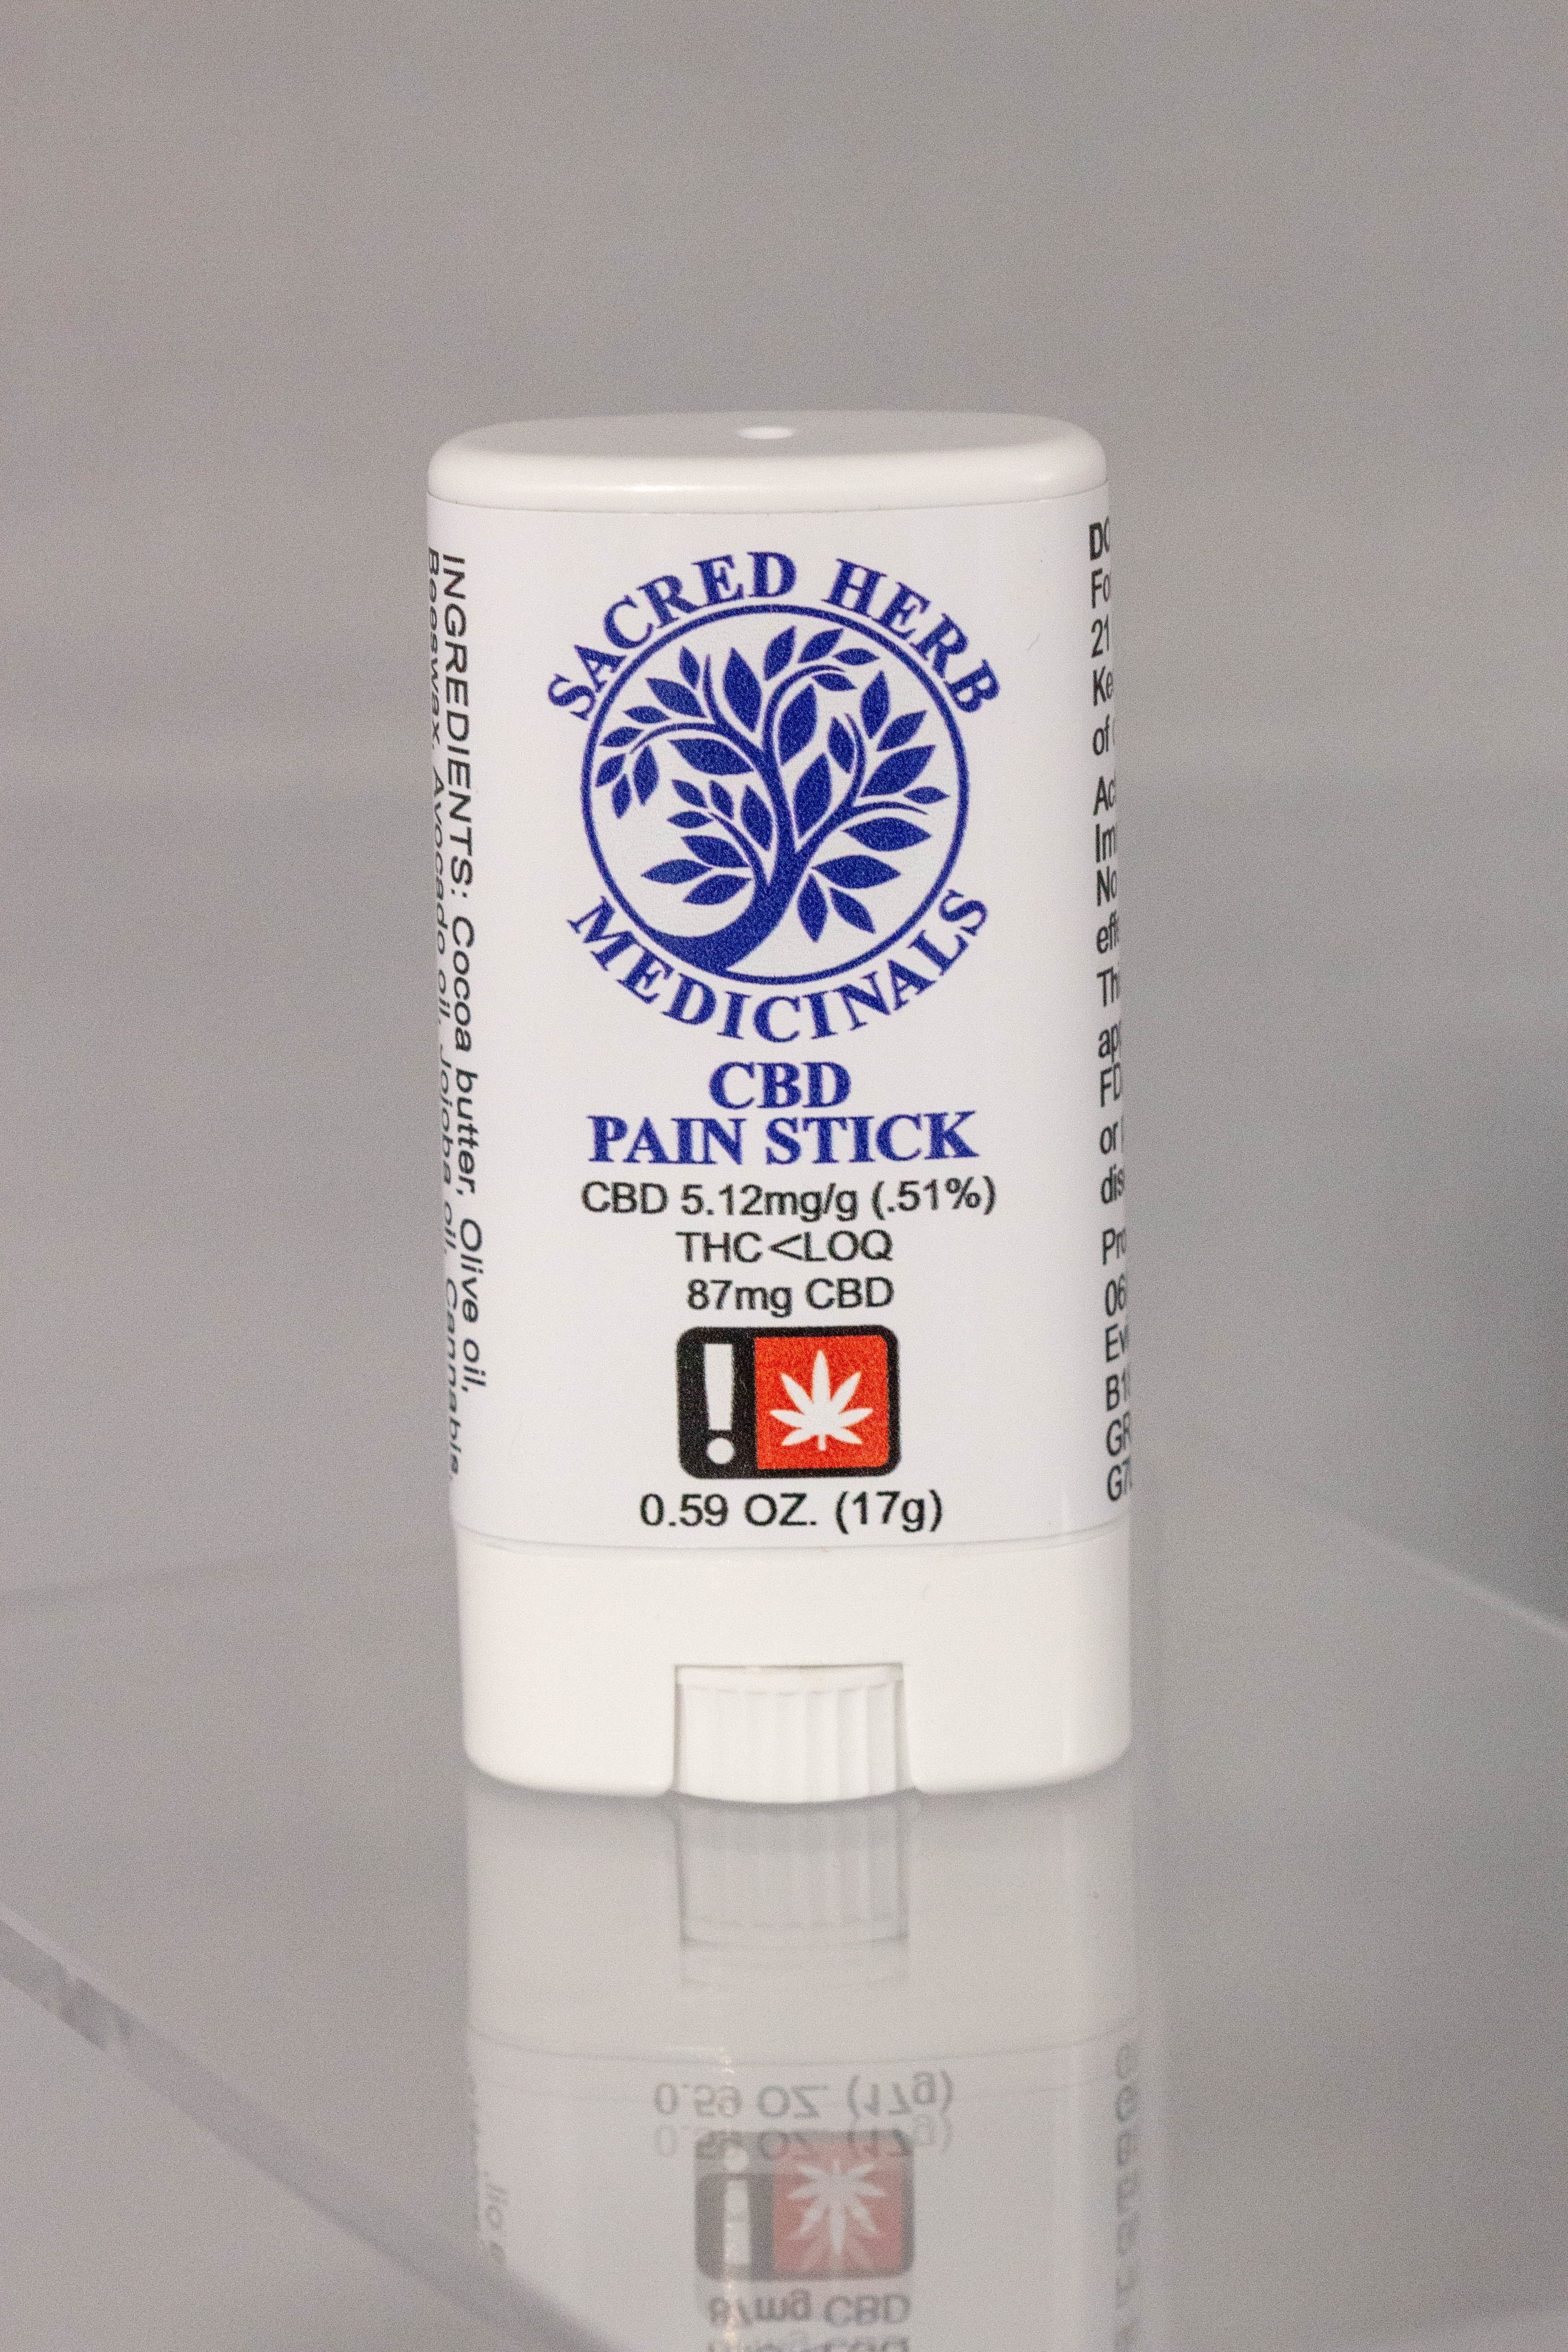 topicals-cbd-pain-stick-by-sacred-herb-medicinals